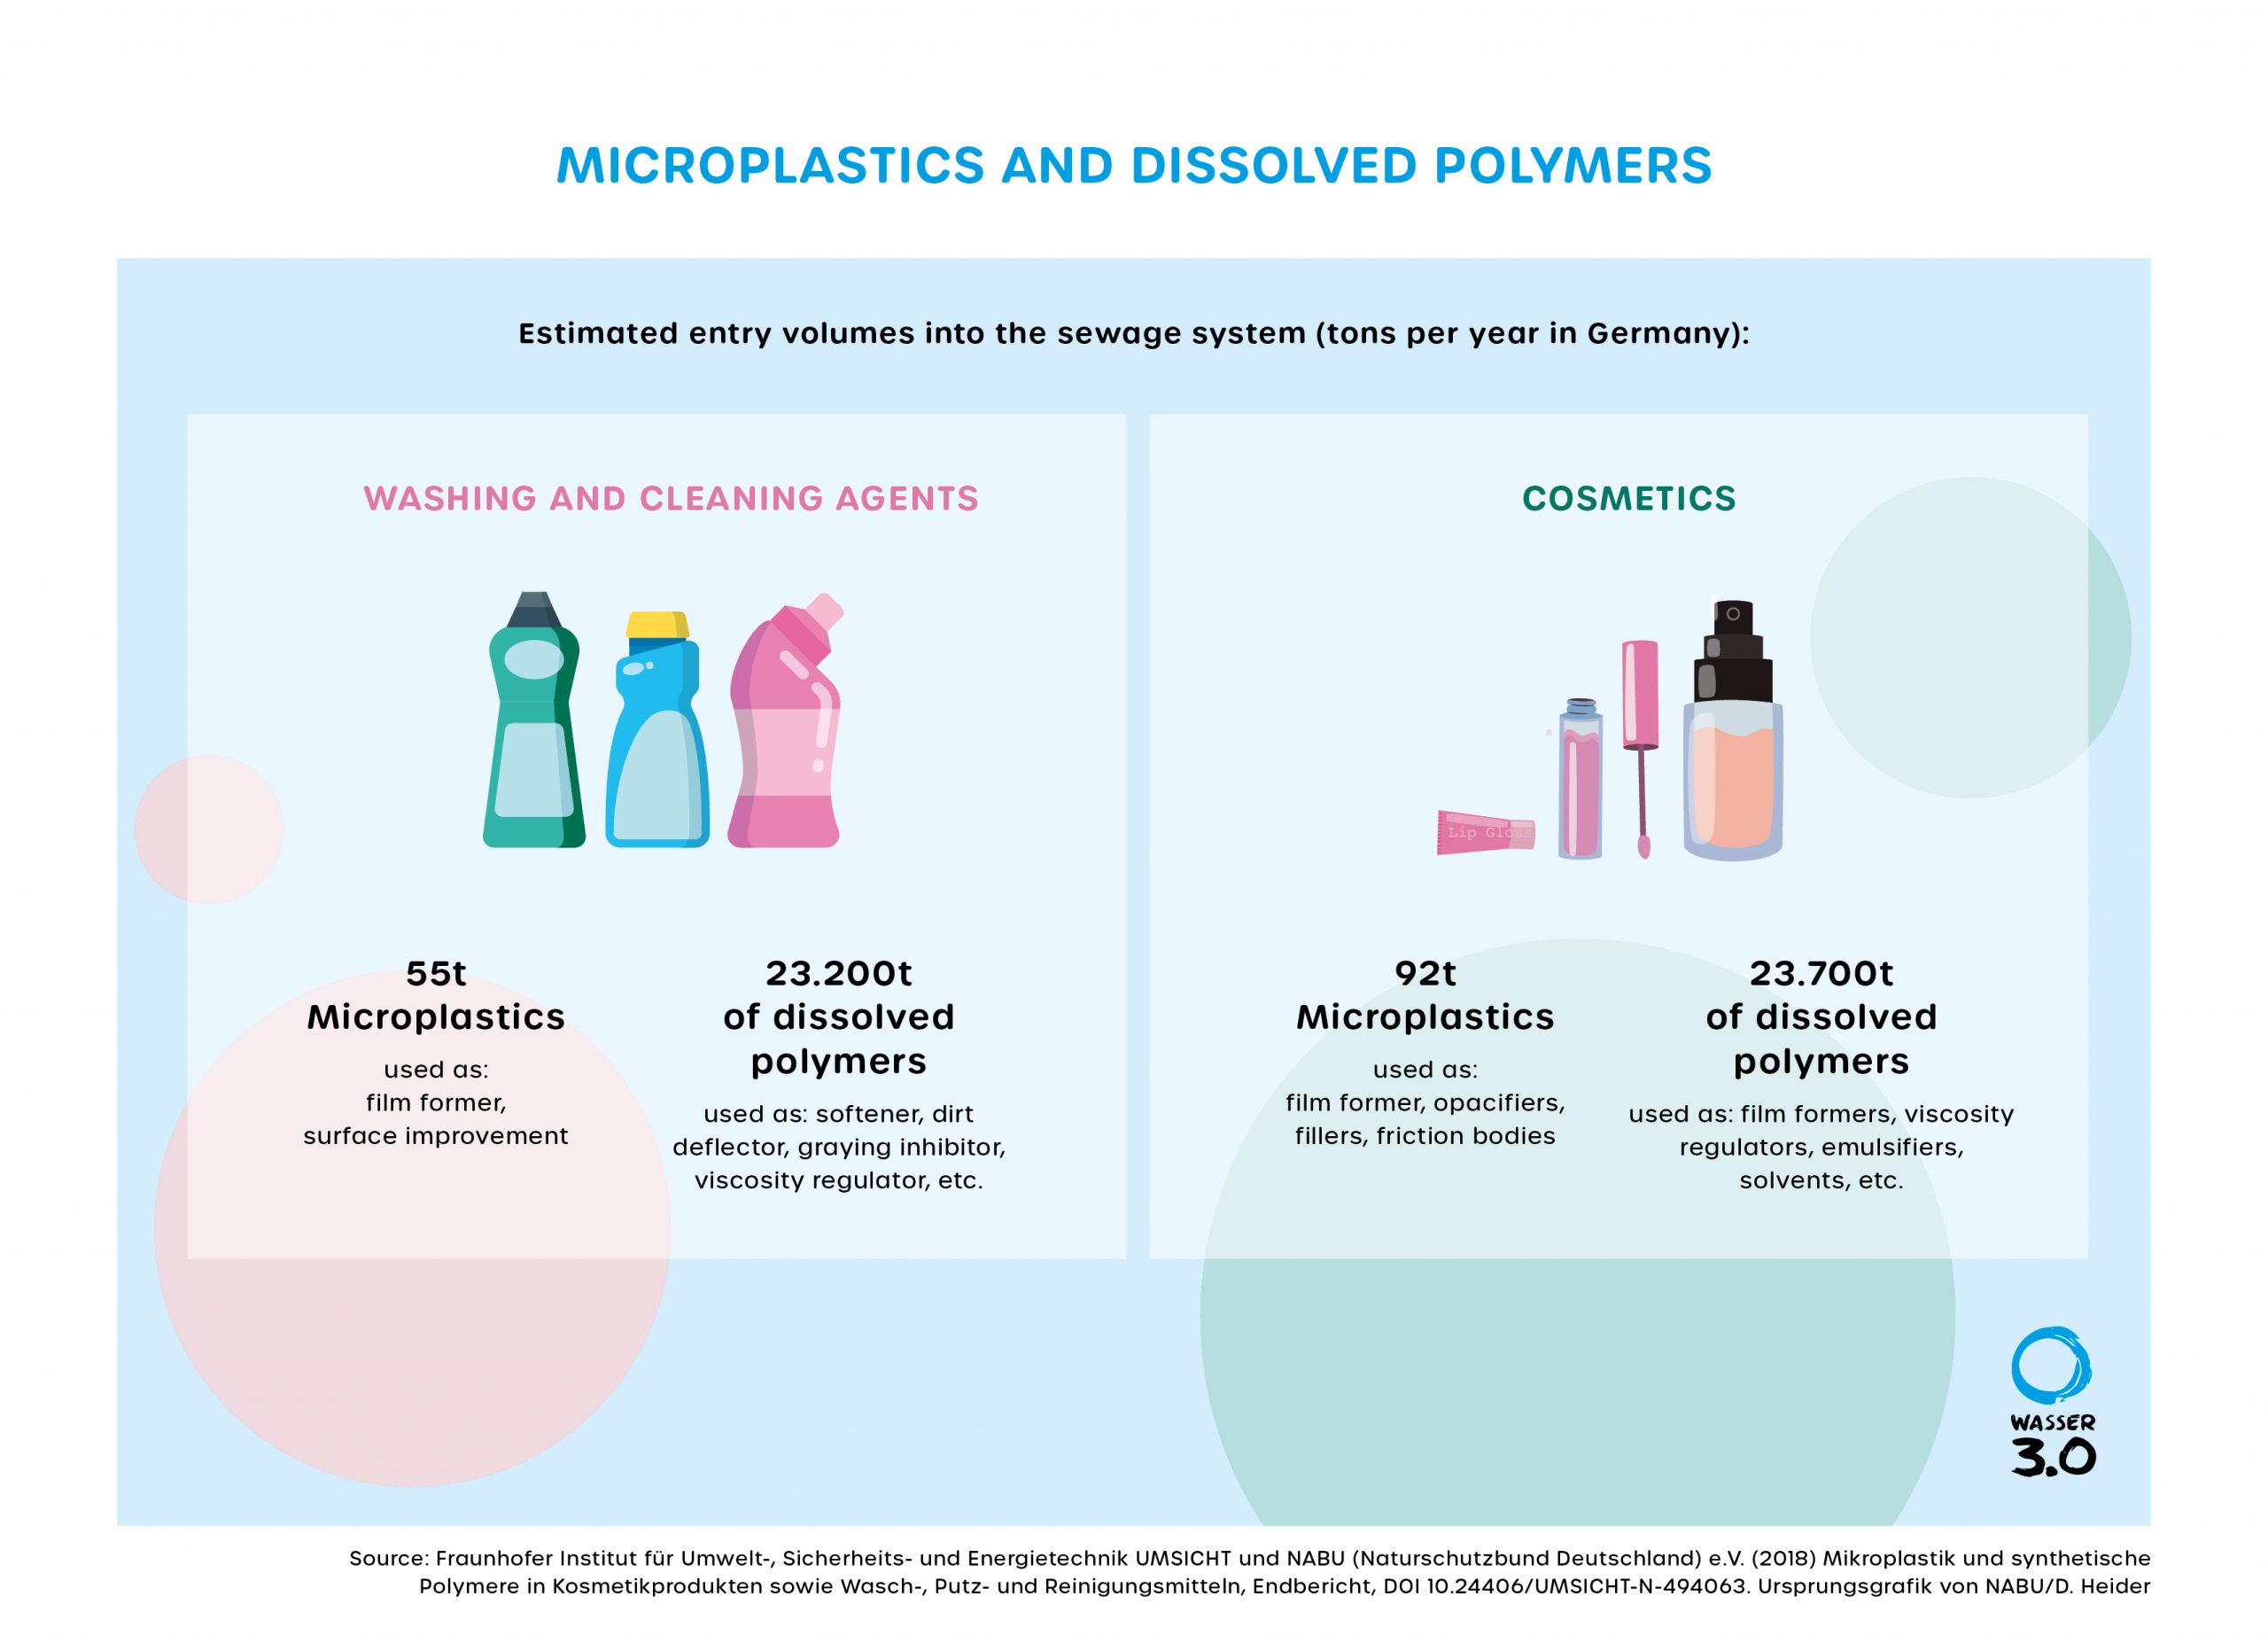 Microplastics and liquid polymers in cosmetics